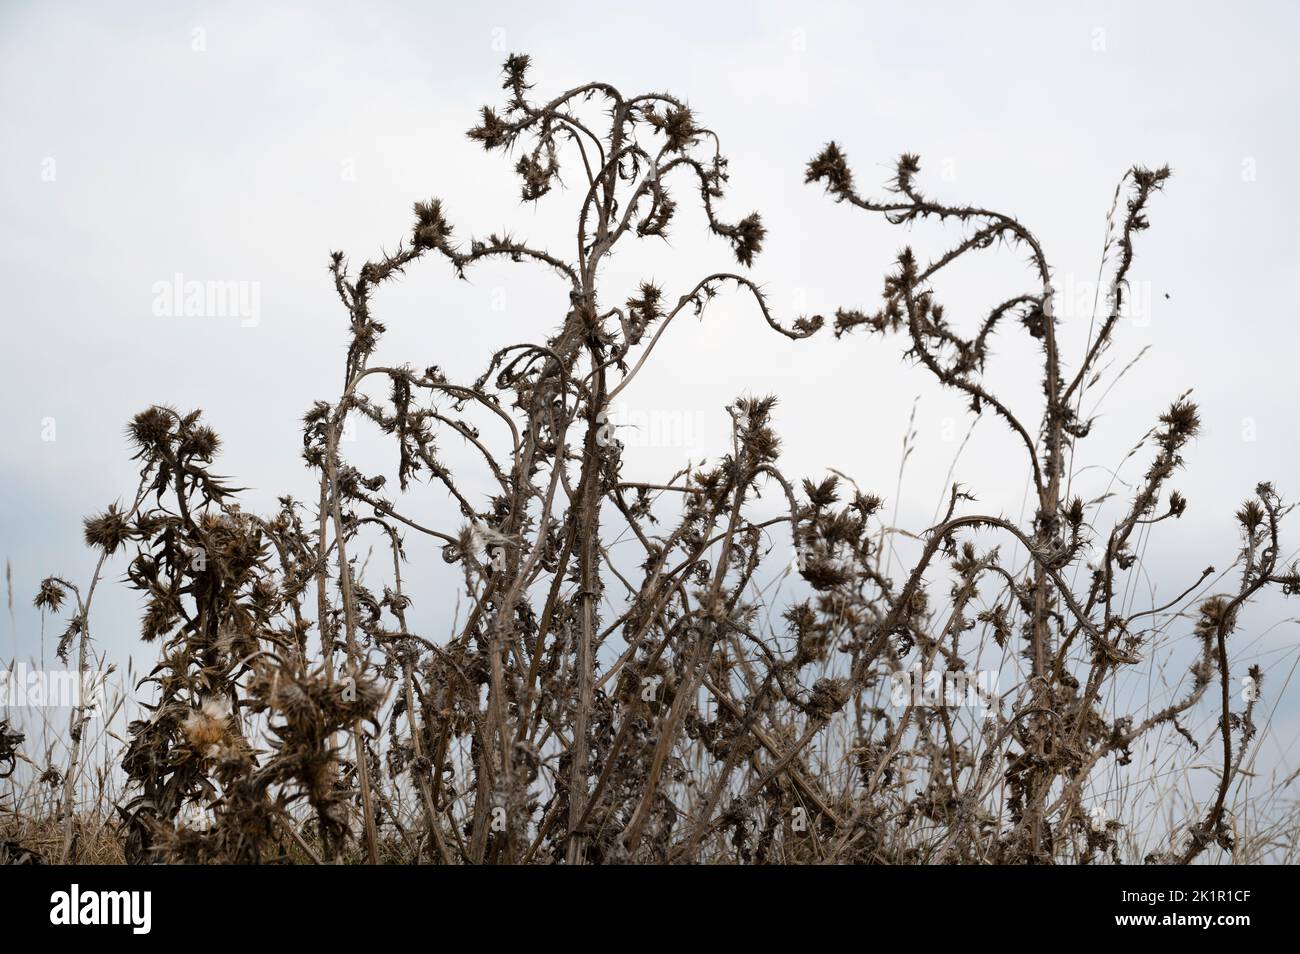 Wales, Pembrokeshire. Near Dale. Dried up plants after heatwave and lack of rain in July 2022. Stock Photo